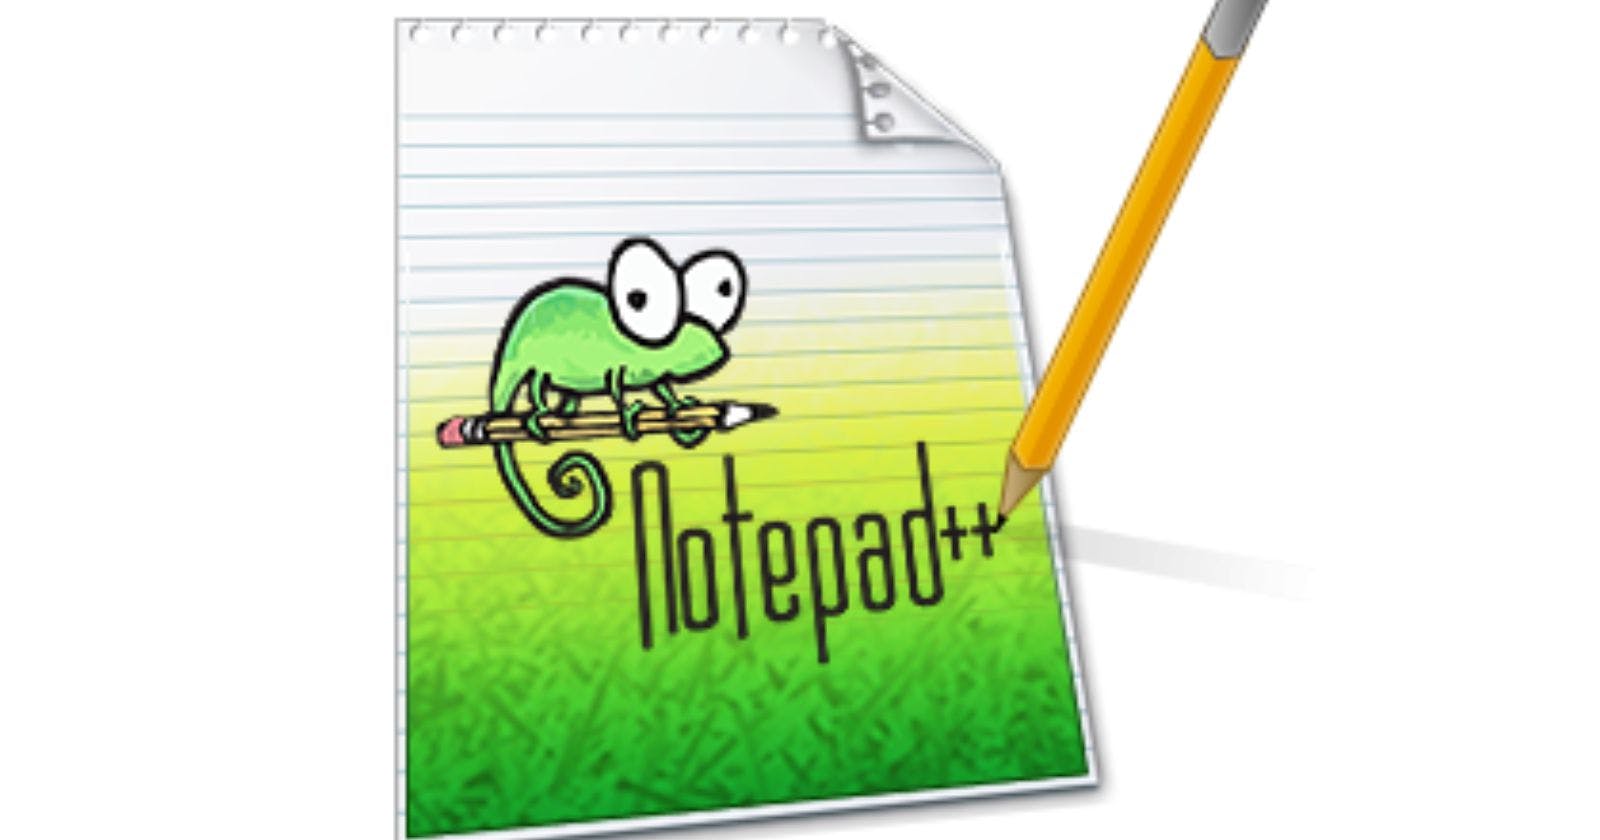 Install Notepad++ on Linux- Here are 2 Simple Methods